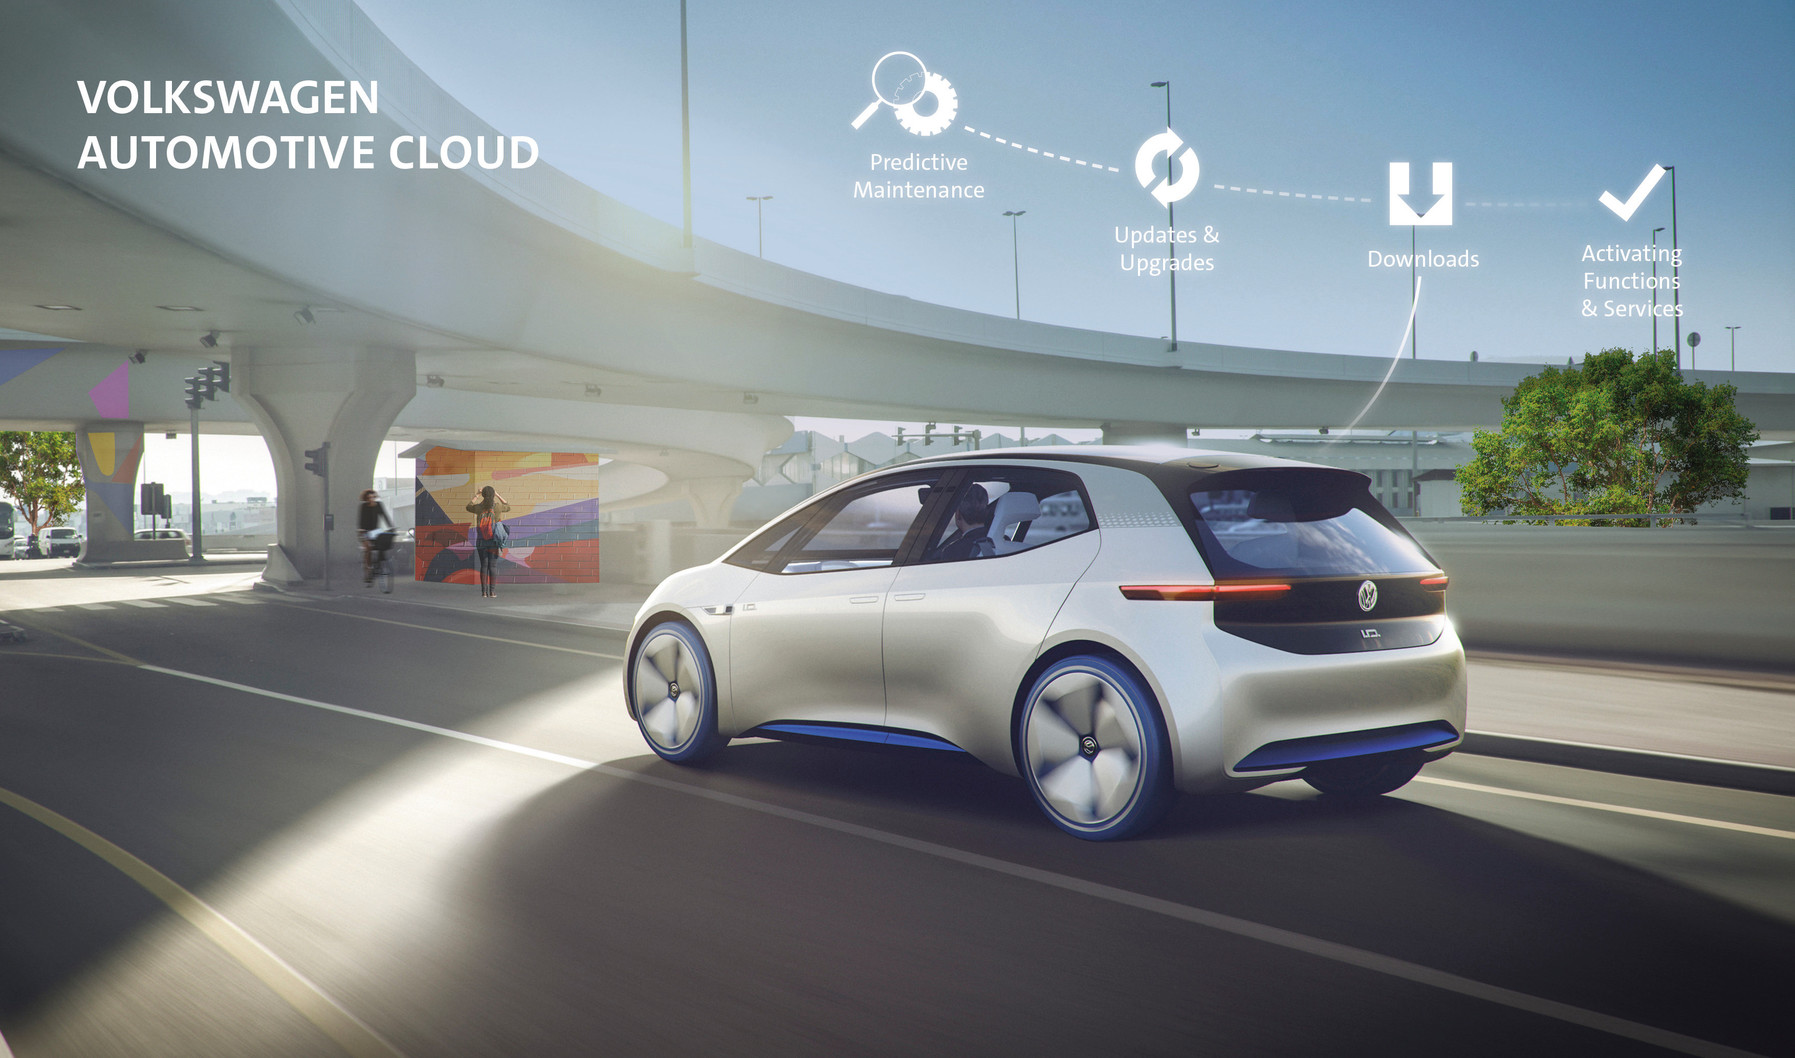 Volkswagen and Microsoft announce strategic partnership for Automotive Cloud